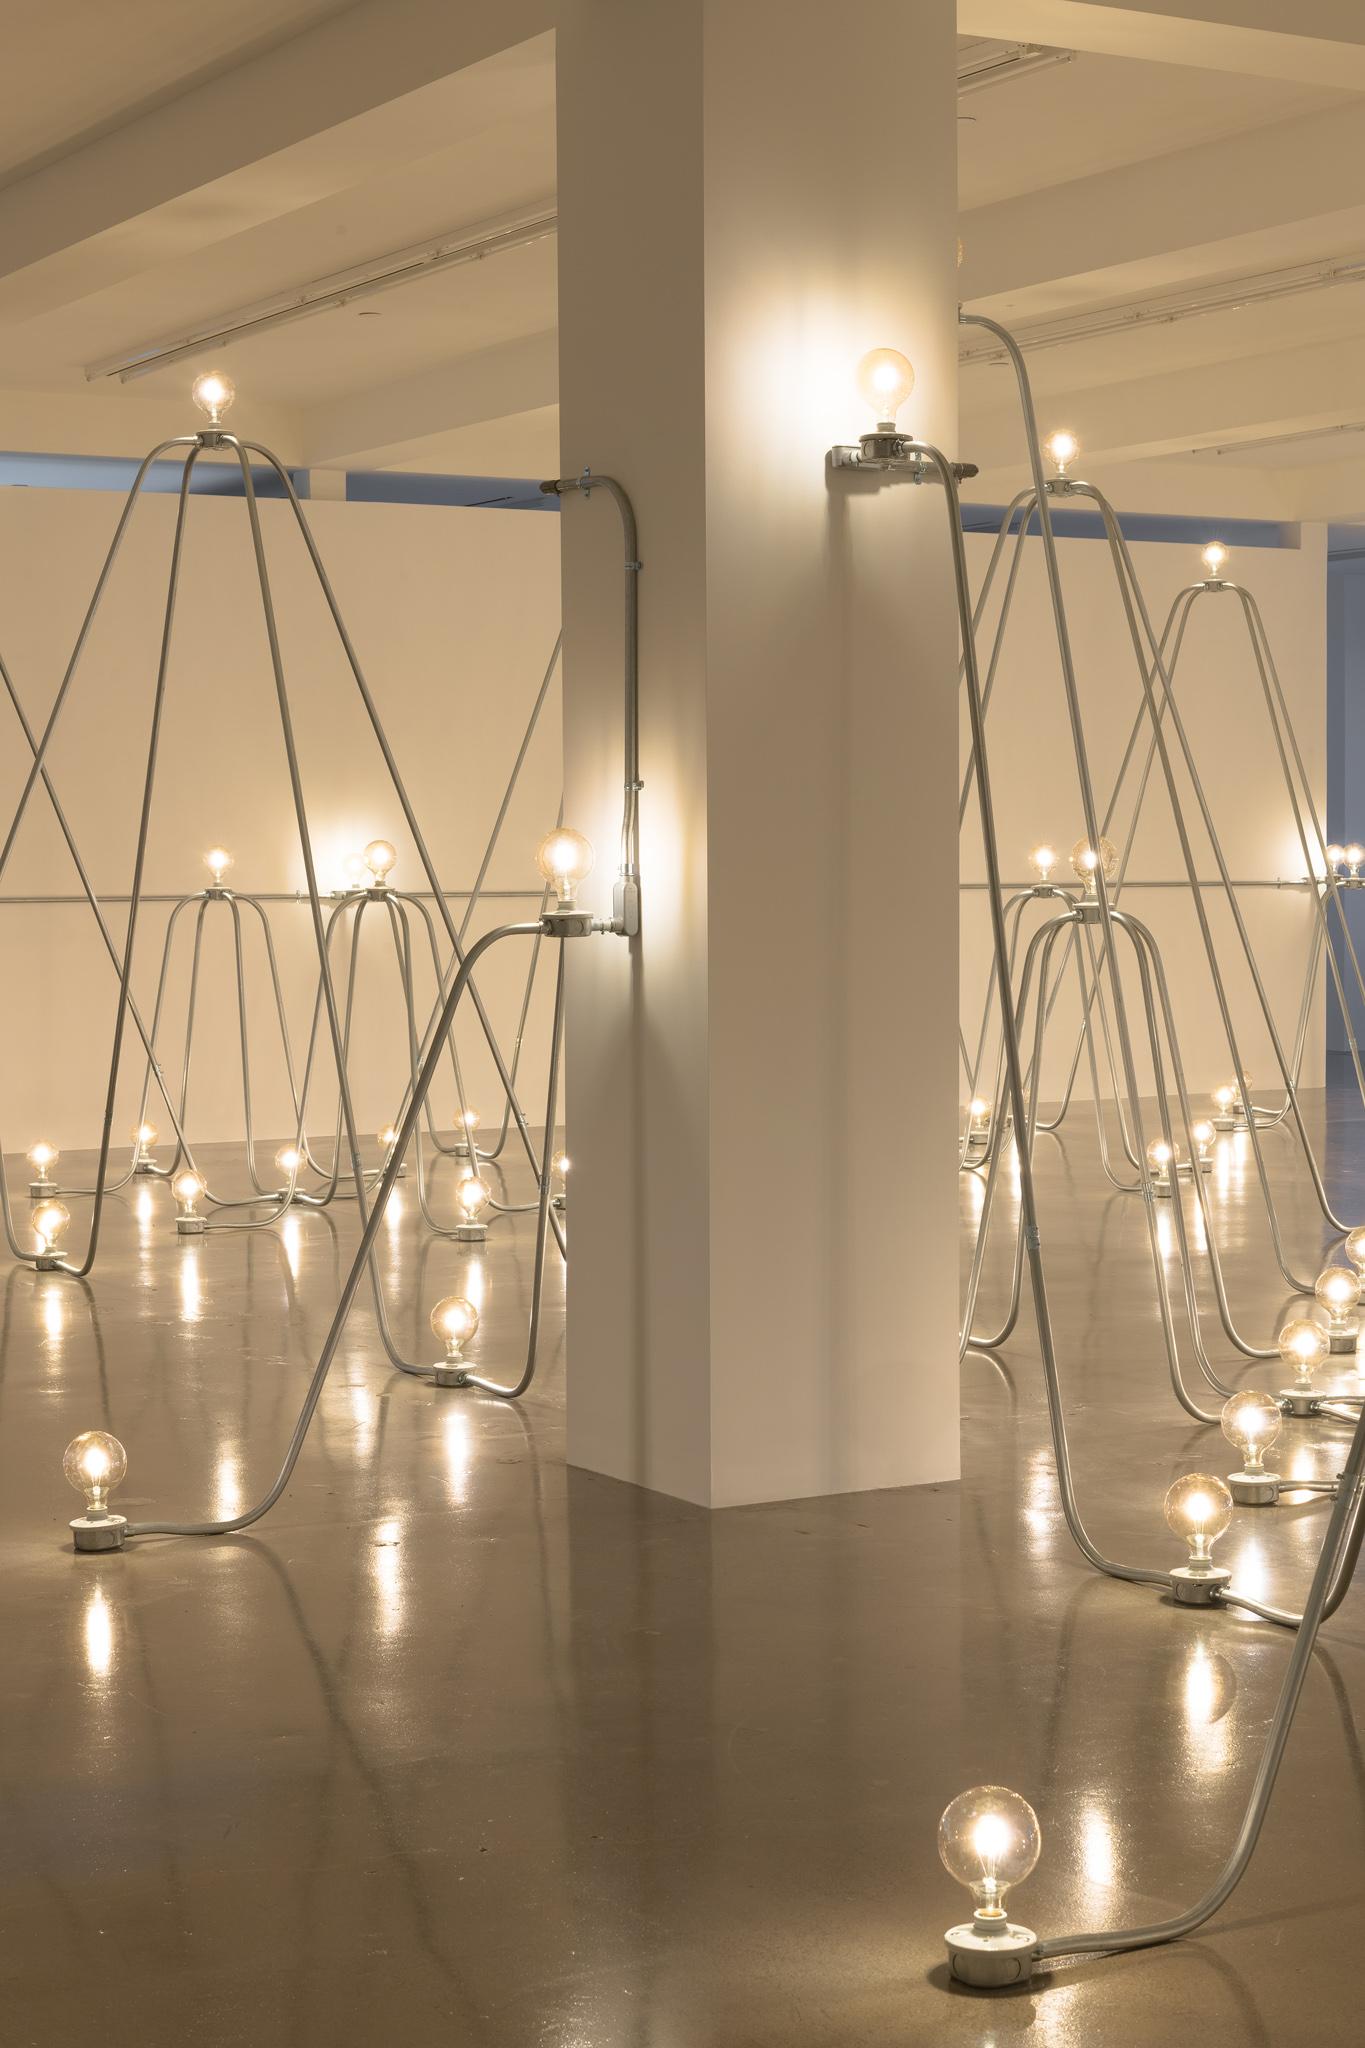 Nancy Holt's sculpture Electrical System, made of metal conduit and lightbulbs, in an exhibition